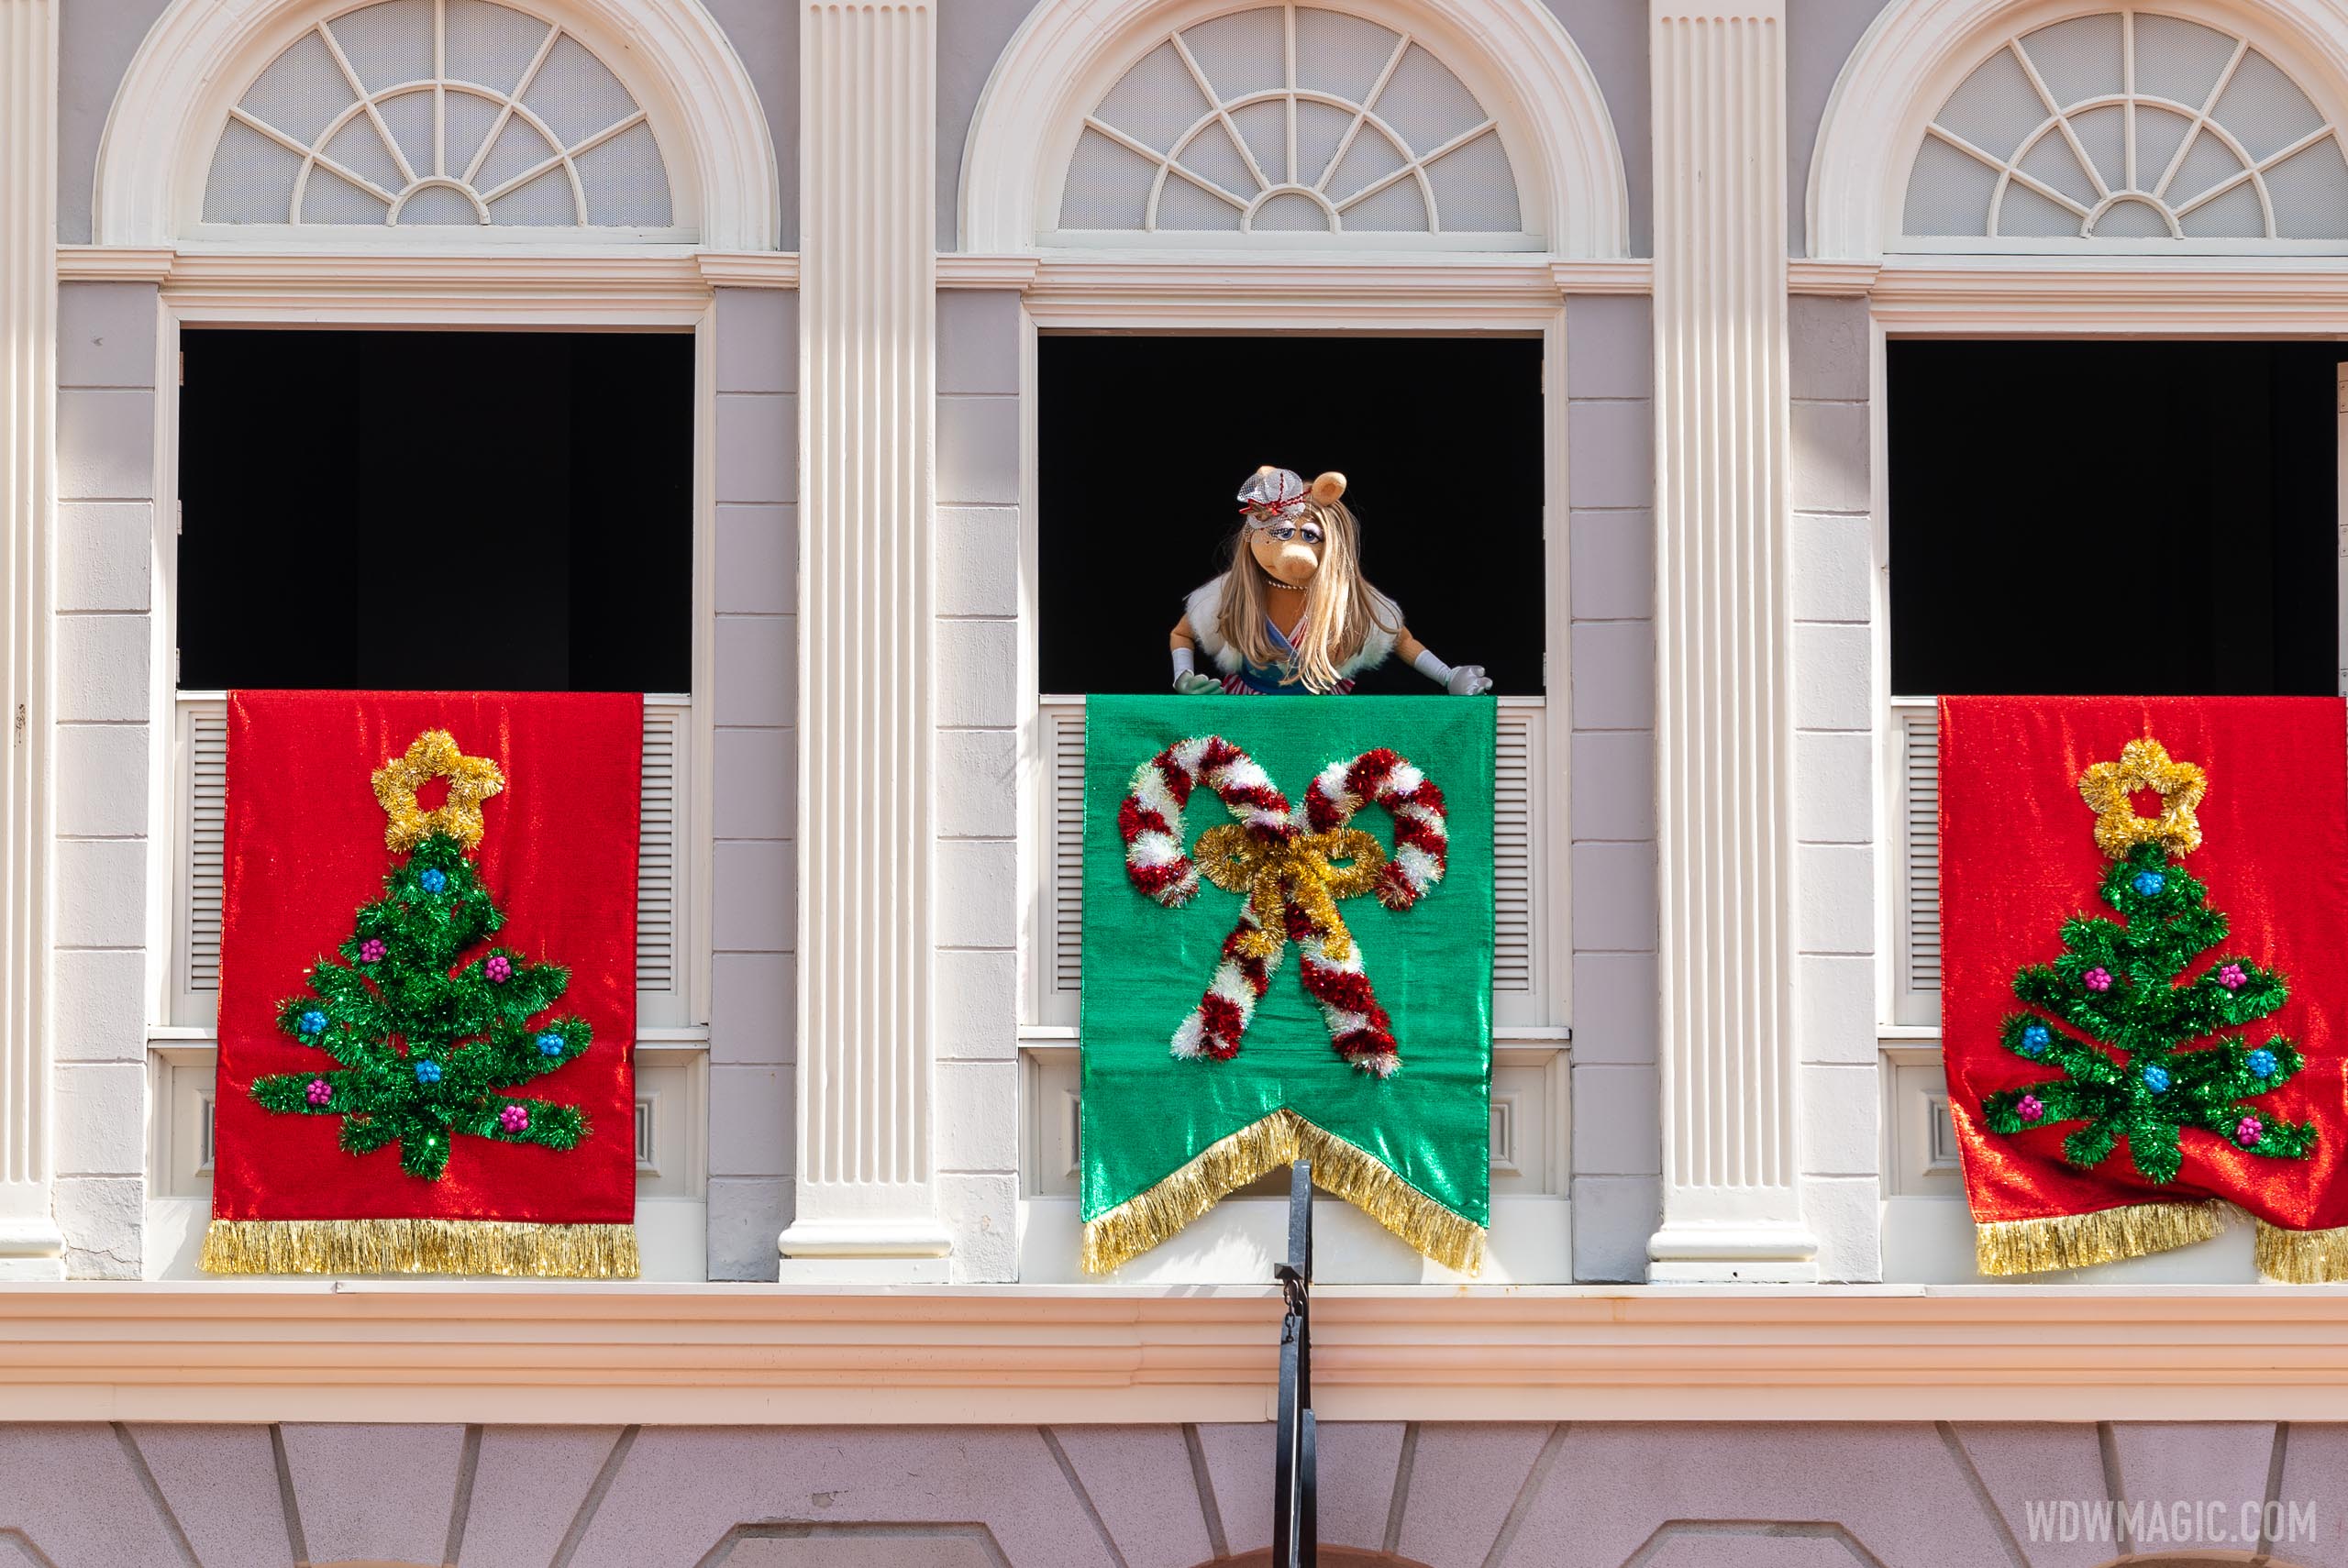 Muppets return to the Magic Kingdom for the holidays